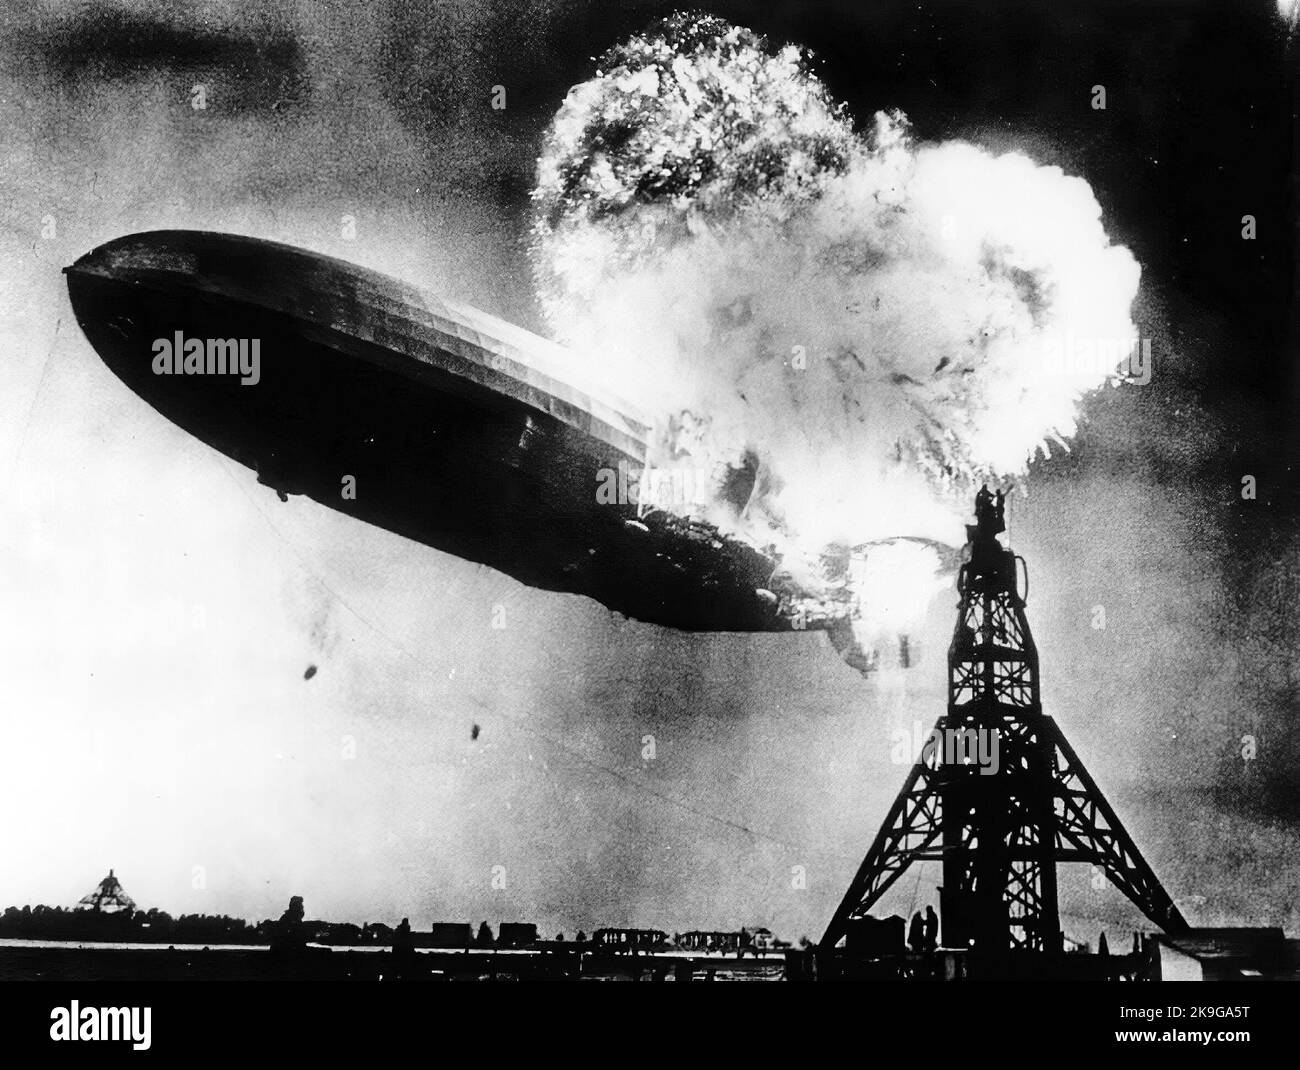 The Hindenburg disaster May 6, 1937 in Lakehurst, Anonymous. Photograph, 1937, Private Collection Stock Photo